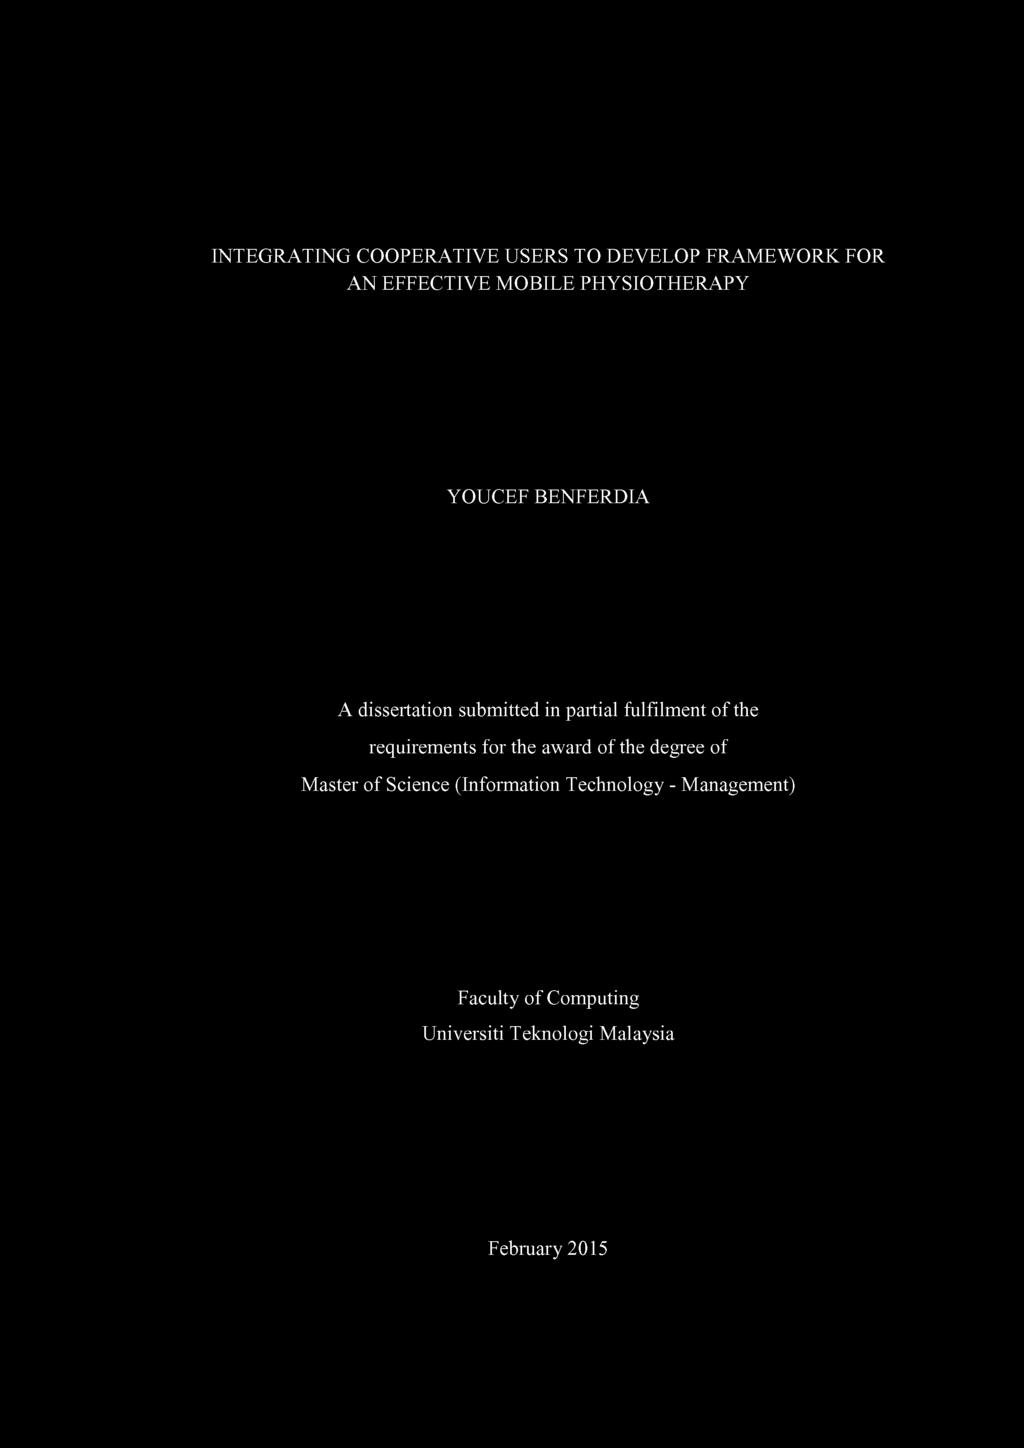 INTEGRATING COOPERATIVE USERS TO DEVELOP FRAMEWORK FOR AN EFFECTIVE MOBILE PHYSIOTHERAPY YOUCEF BENFERDIA A dissertation submitted in partial fulfilment of the